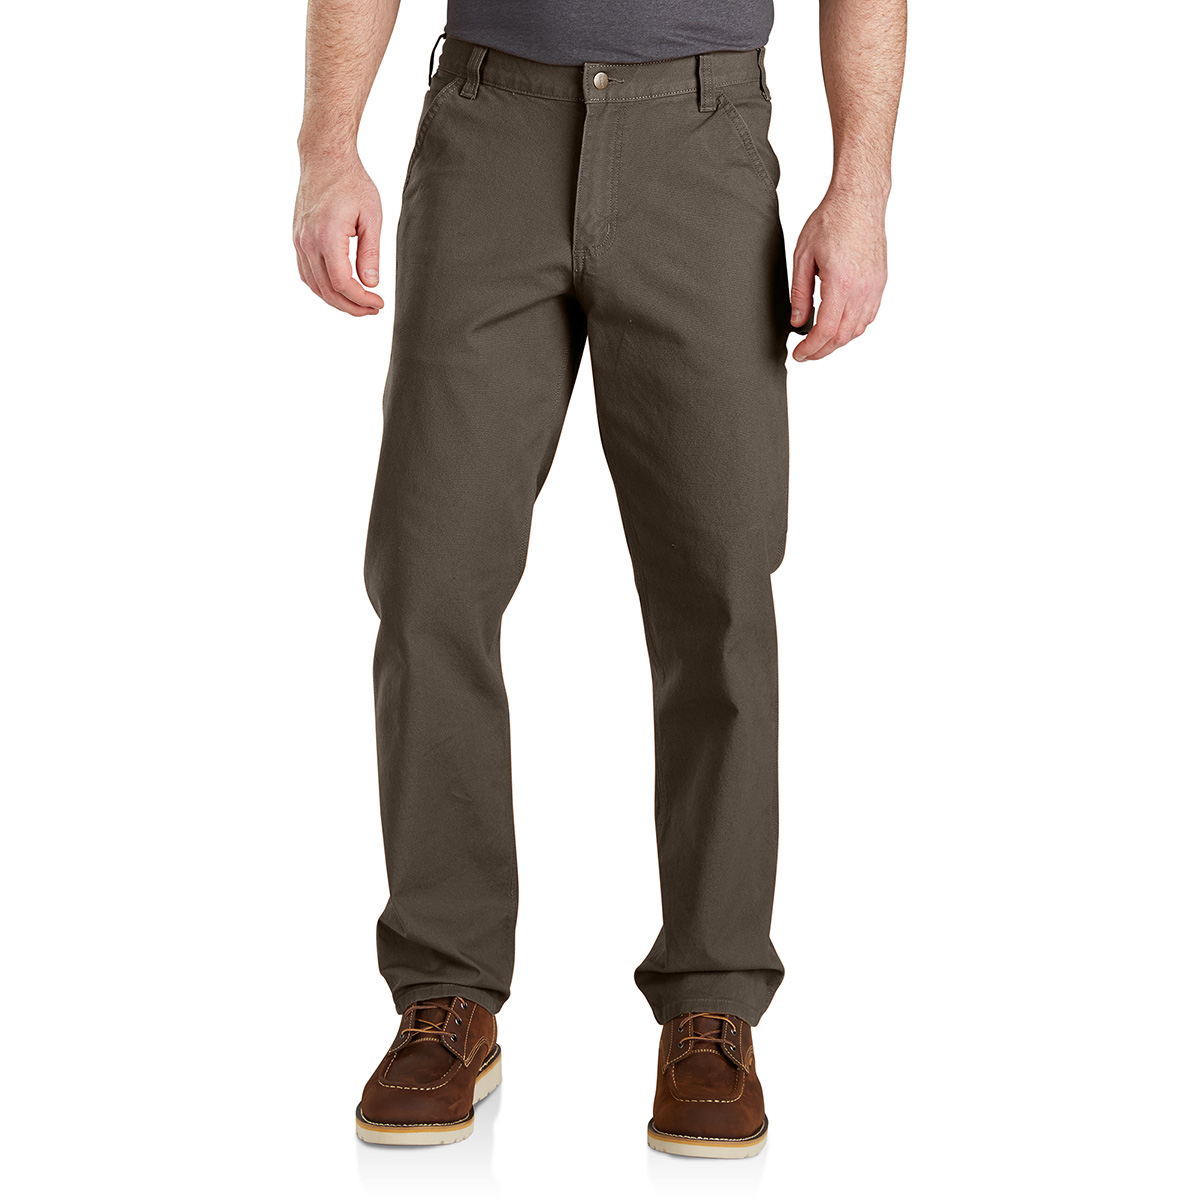 Men's Relaxed Fit Cargo Pants Premium Relaxed Fit Straight Leg Work Cargo  Pant | eBay